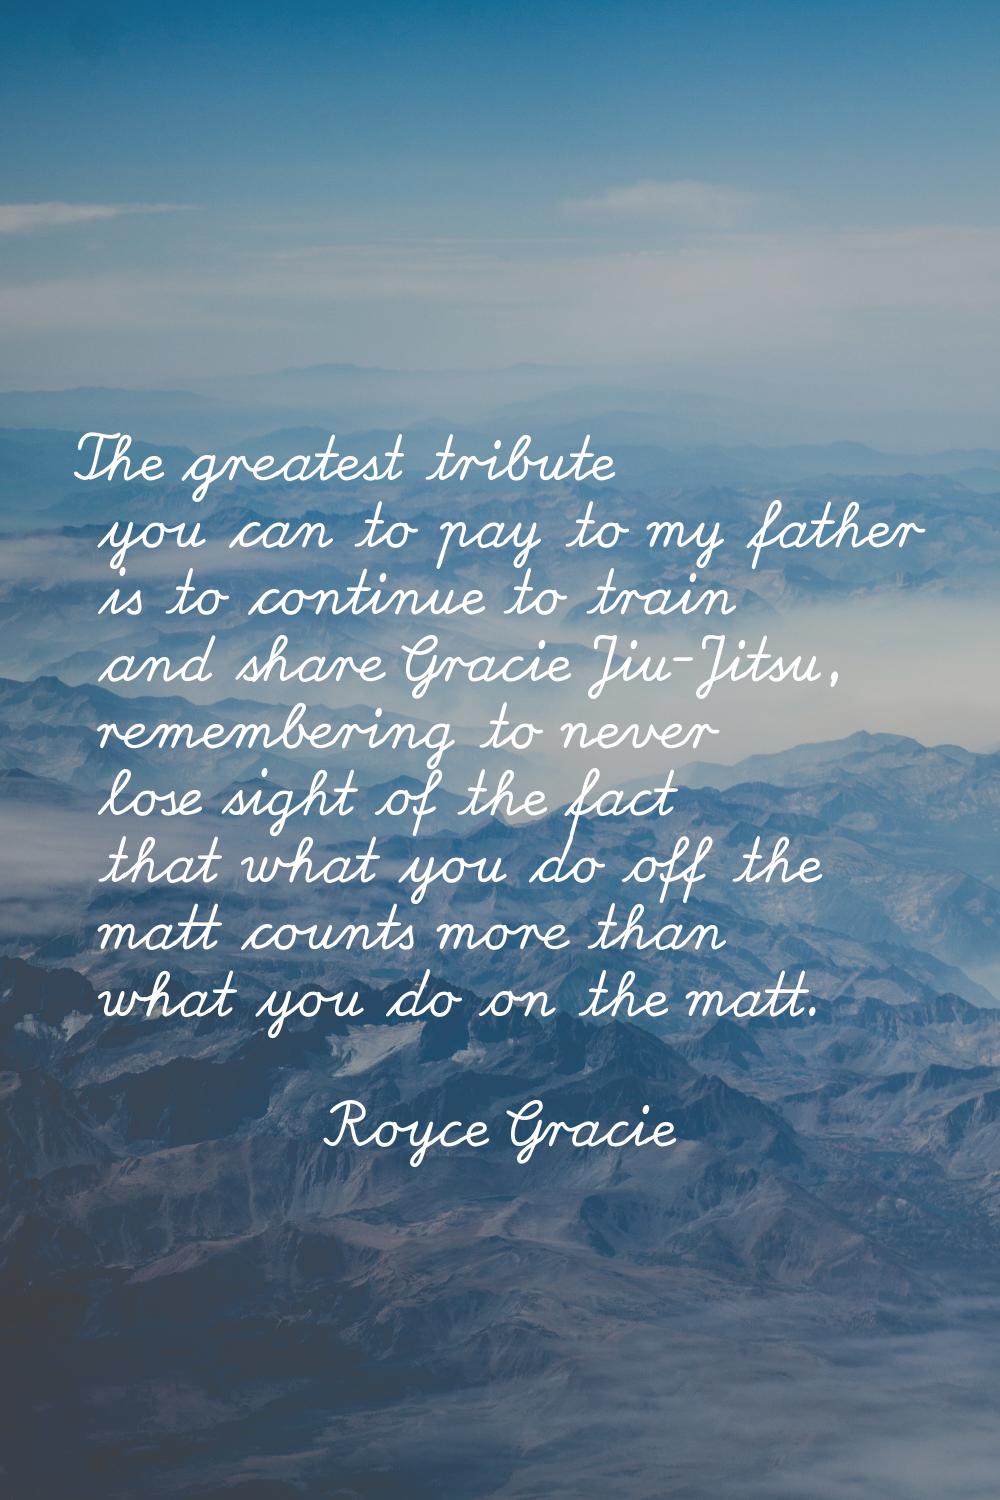 The greatest tribute you can to pay to my father is to continue to train and share Gracie Jiu-Jitsu